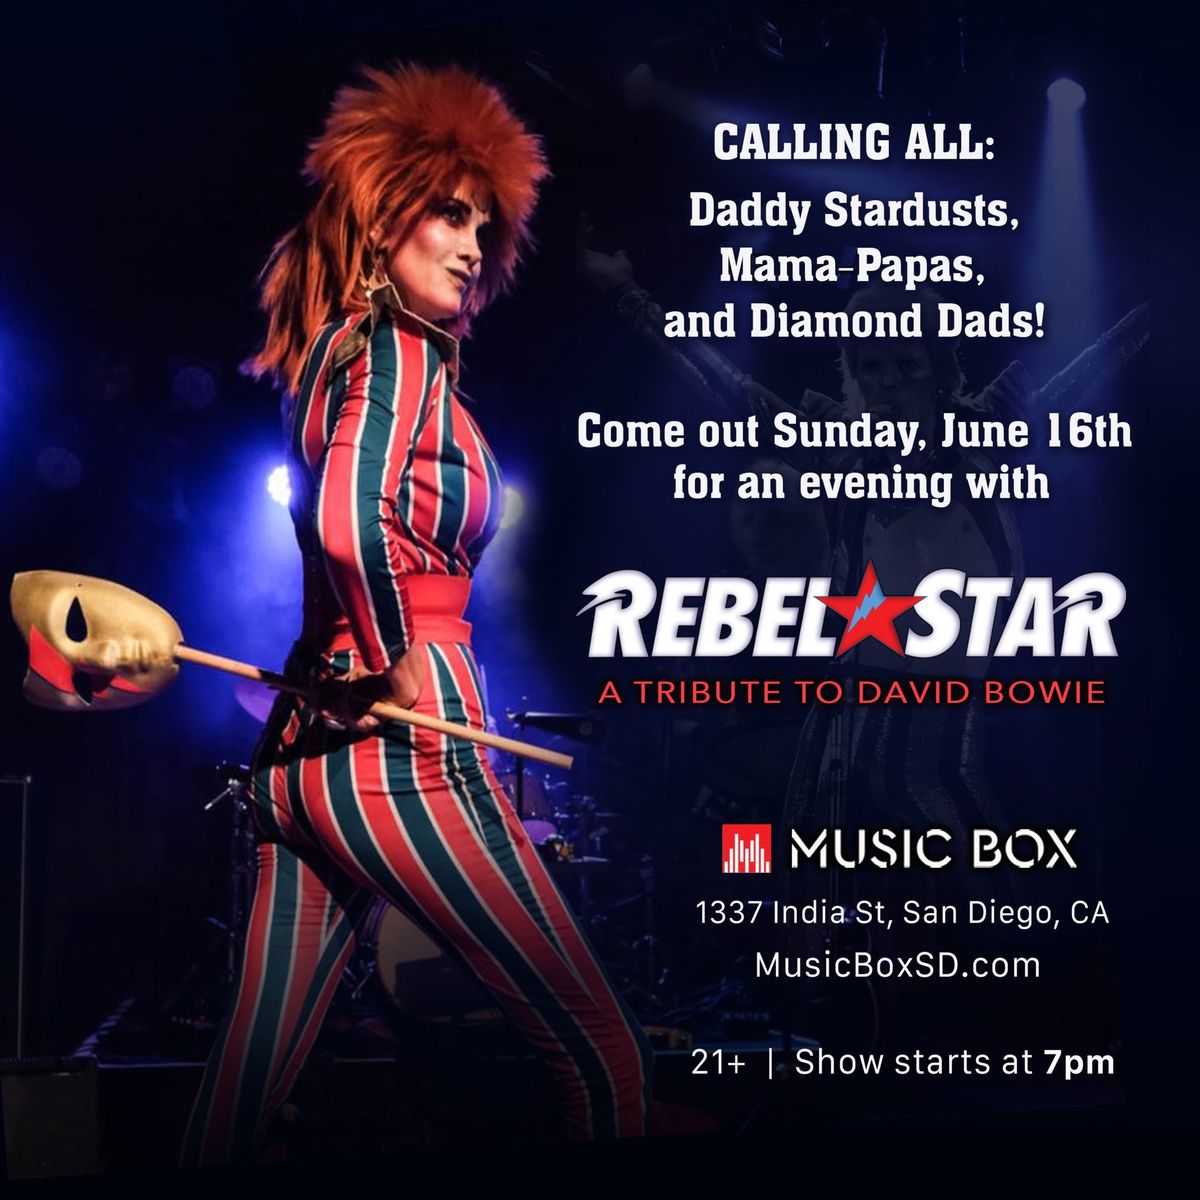 An Evening with Rebel Star at Music Box, San Diego, CA 7pm